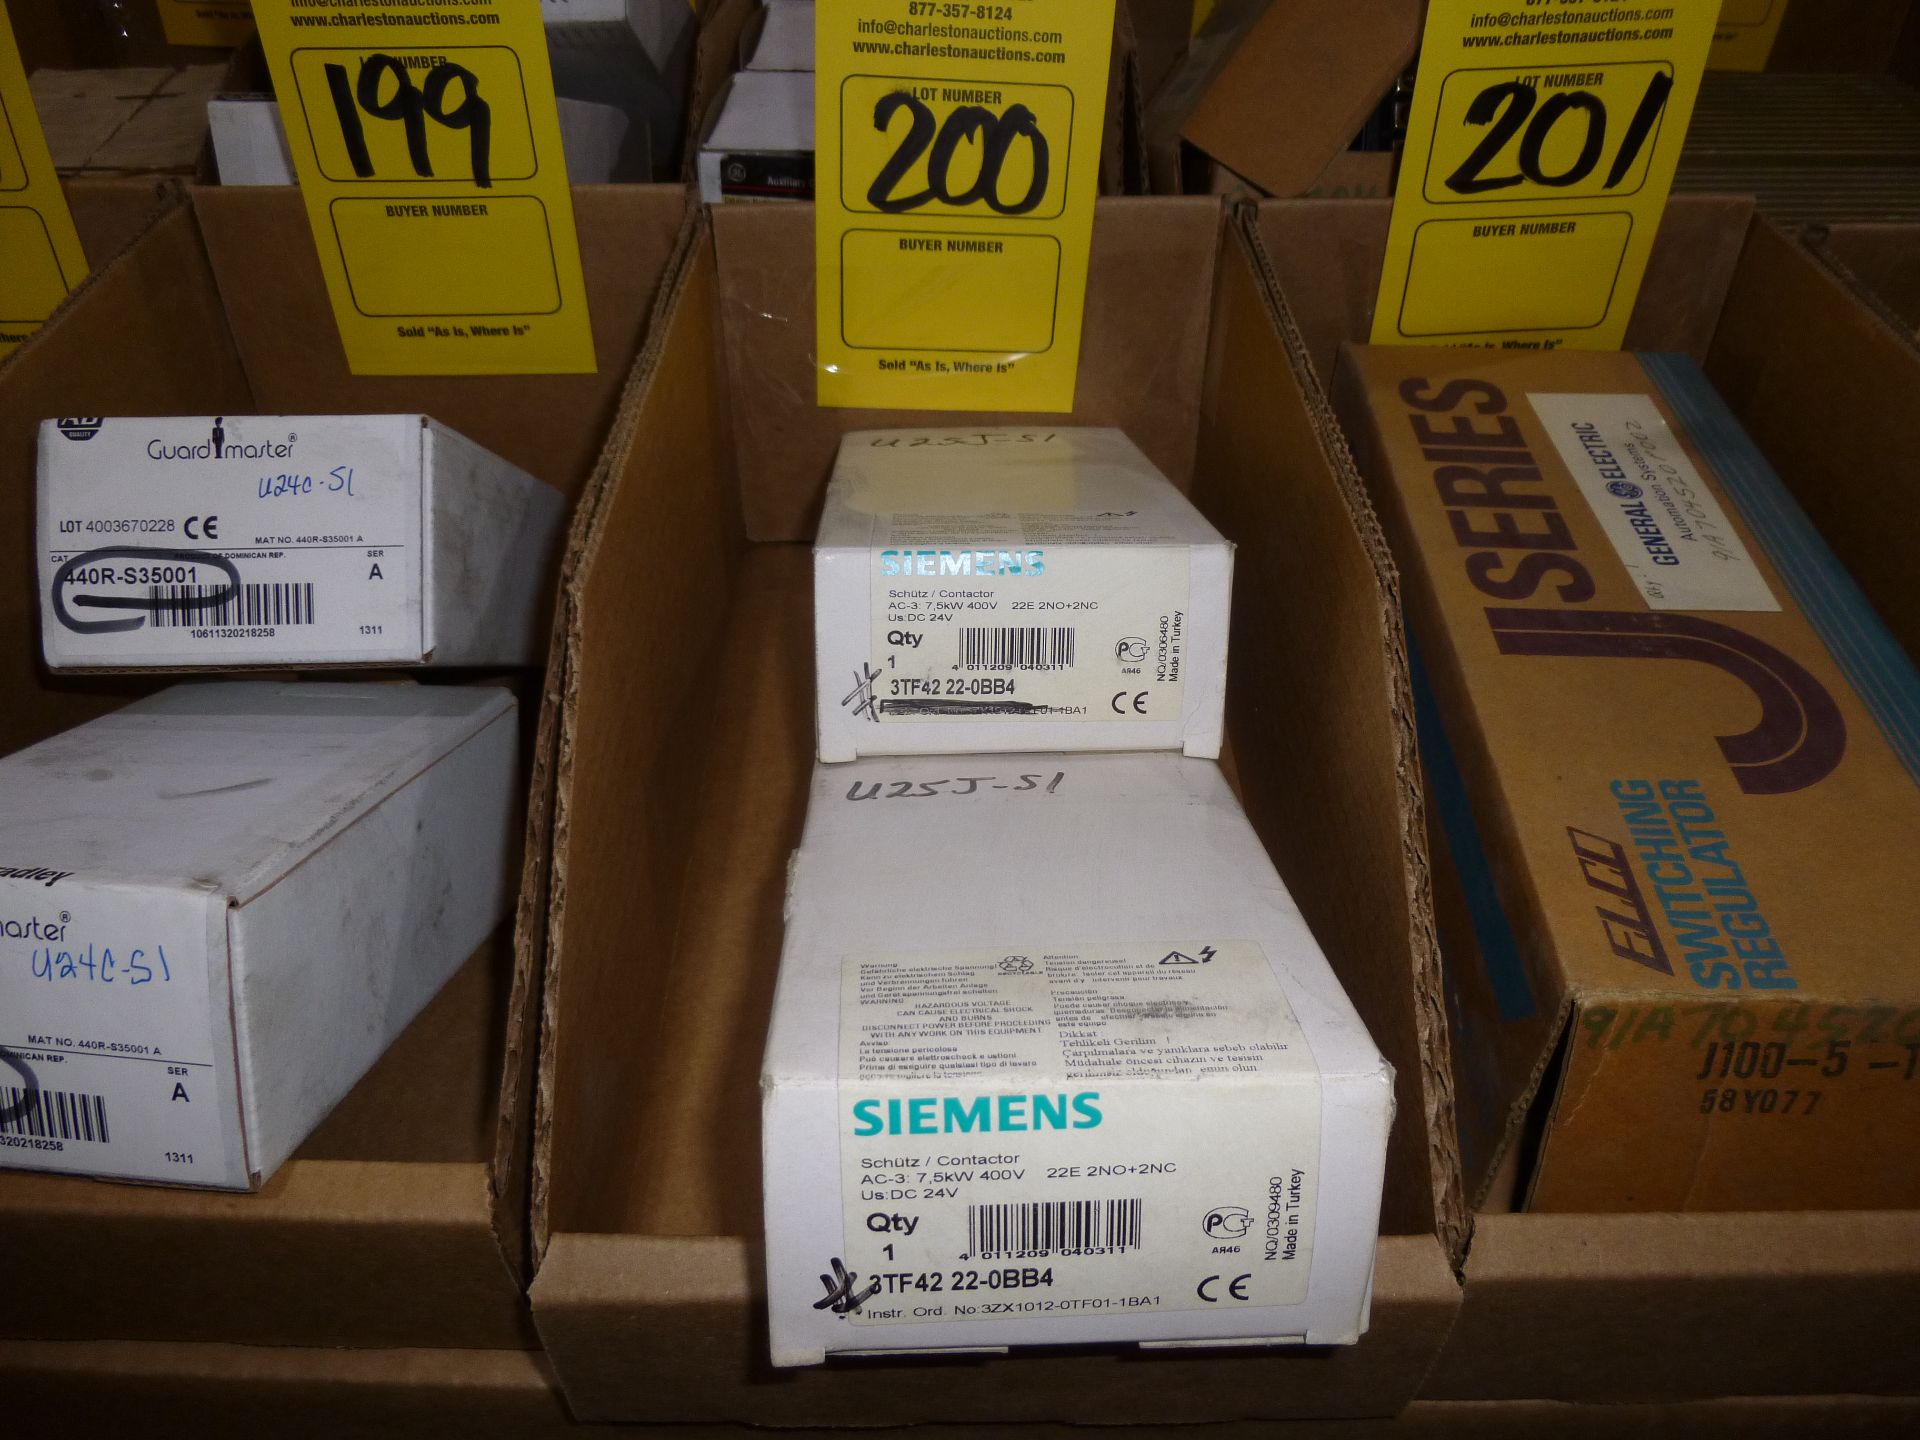 Qty 2 Seimens contactor part number 3TF42-22-0BB4, new in boxes, as always with Brolyn LLC auctions,